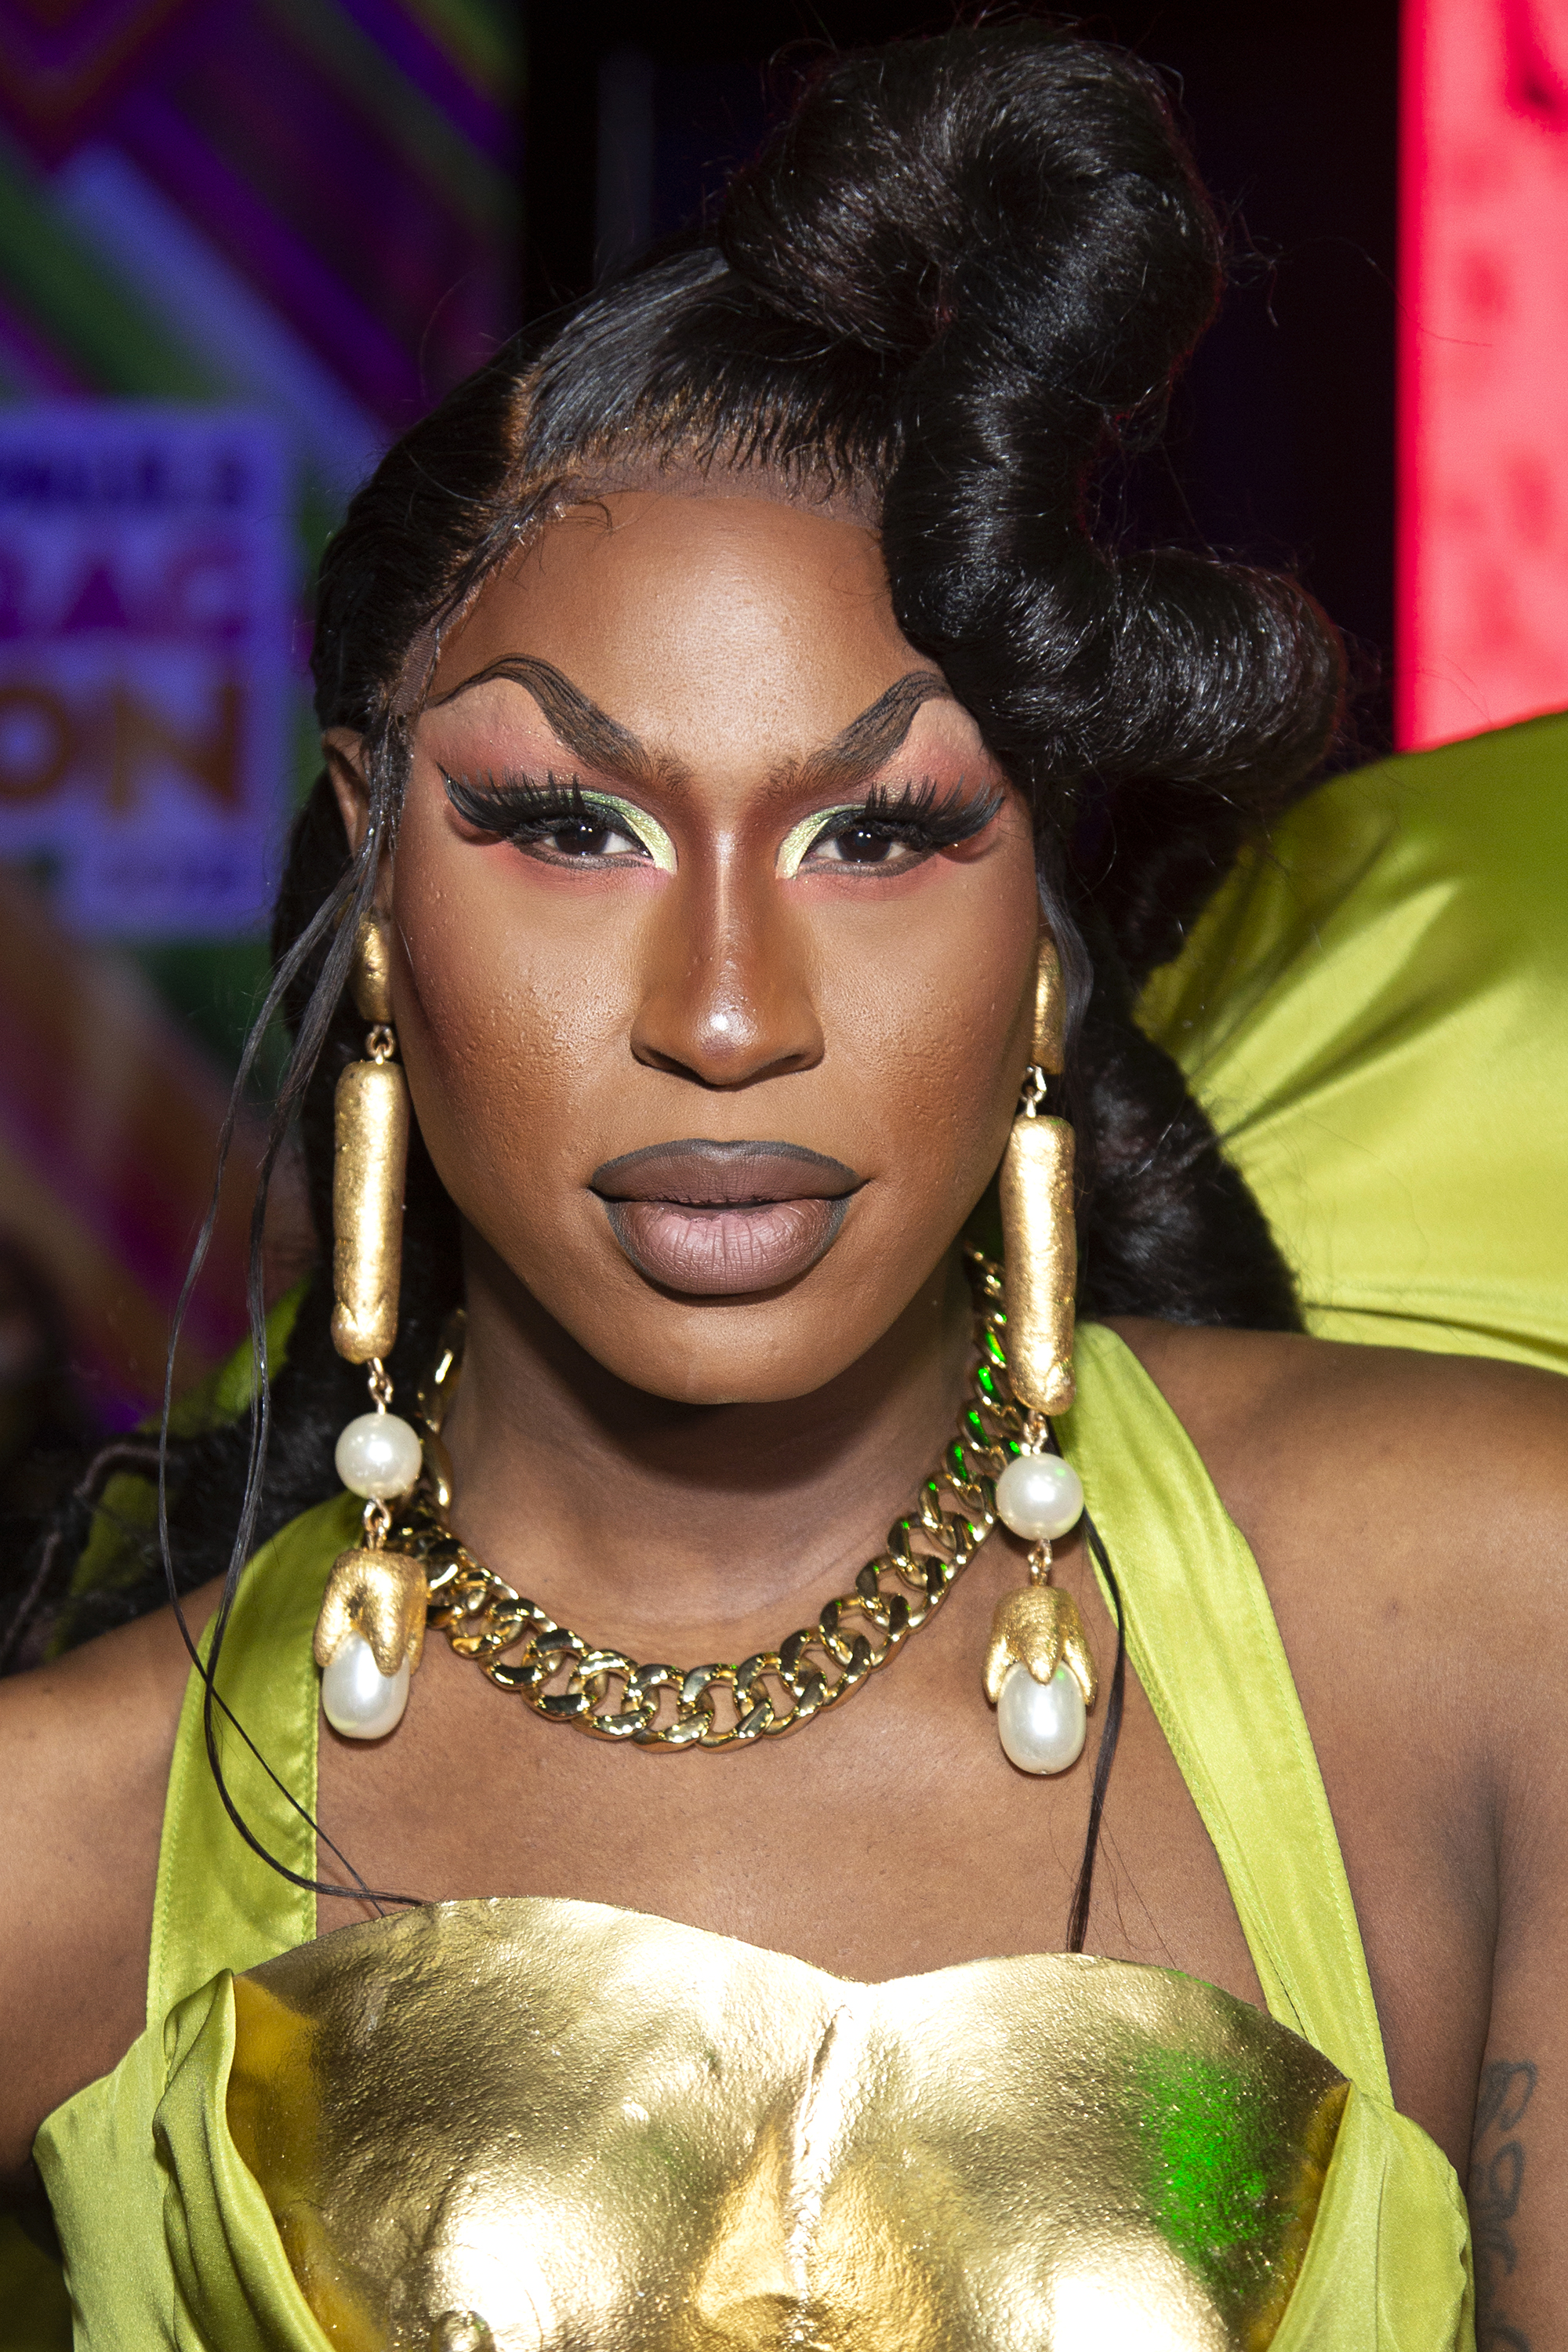 Shea with an elaborate updo, bold makeup, large earrings, and a metal-plated outfit at an event